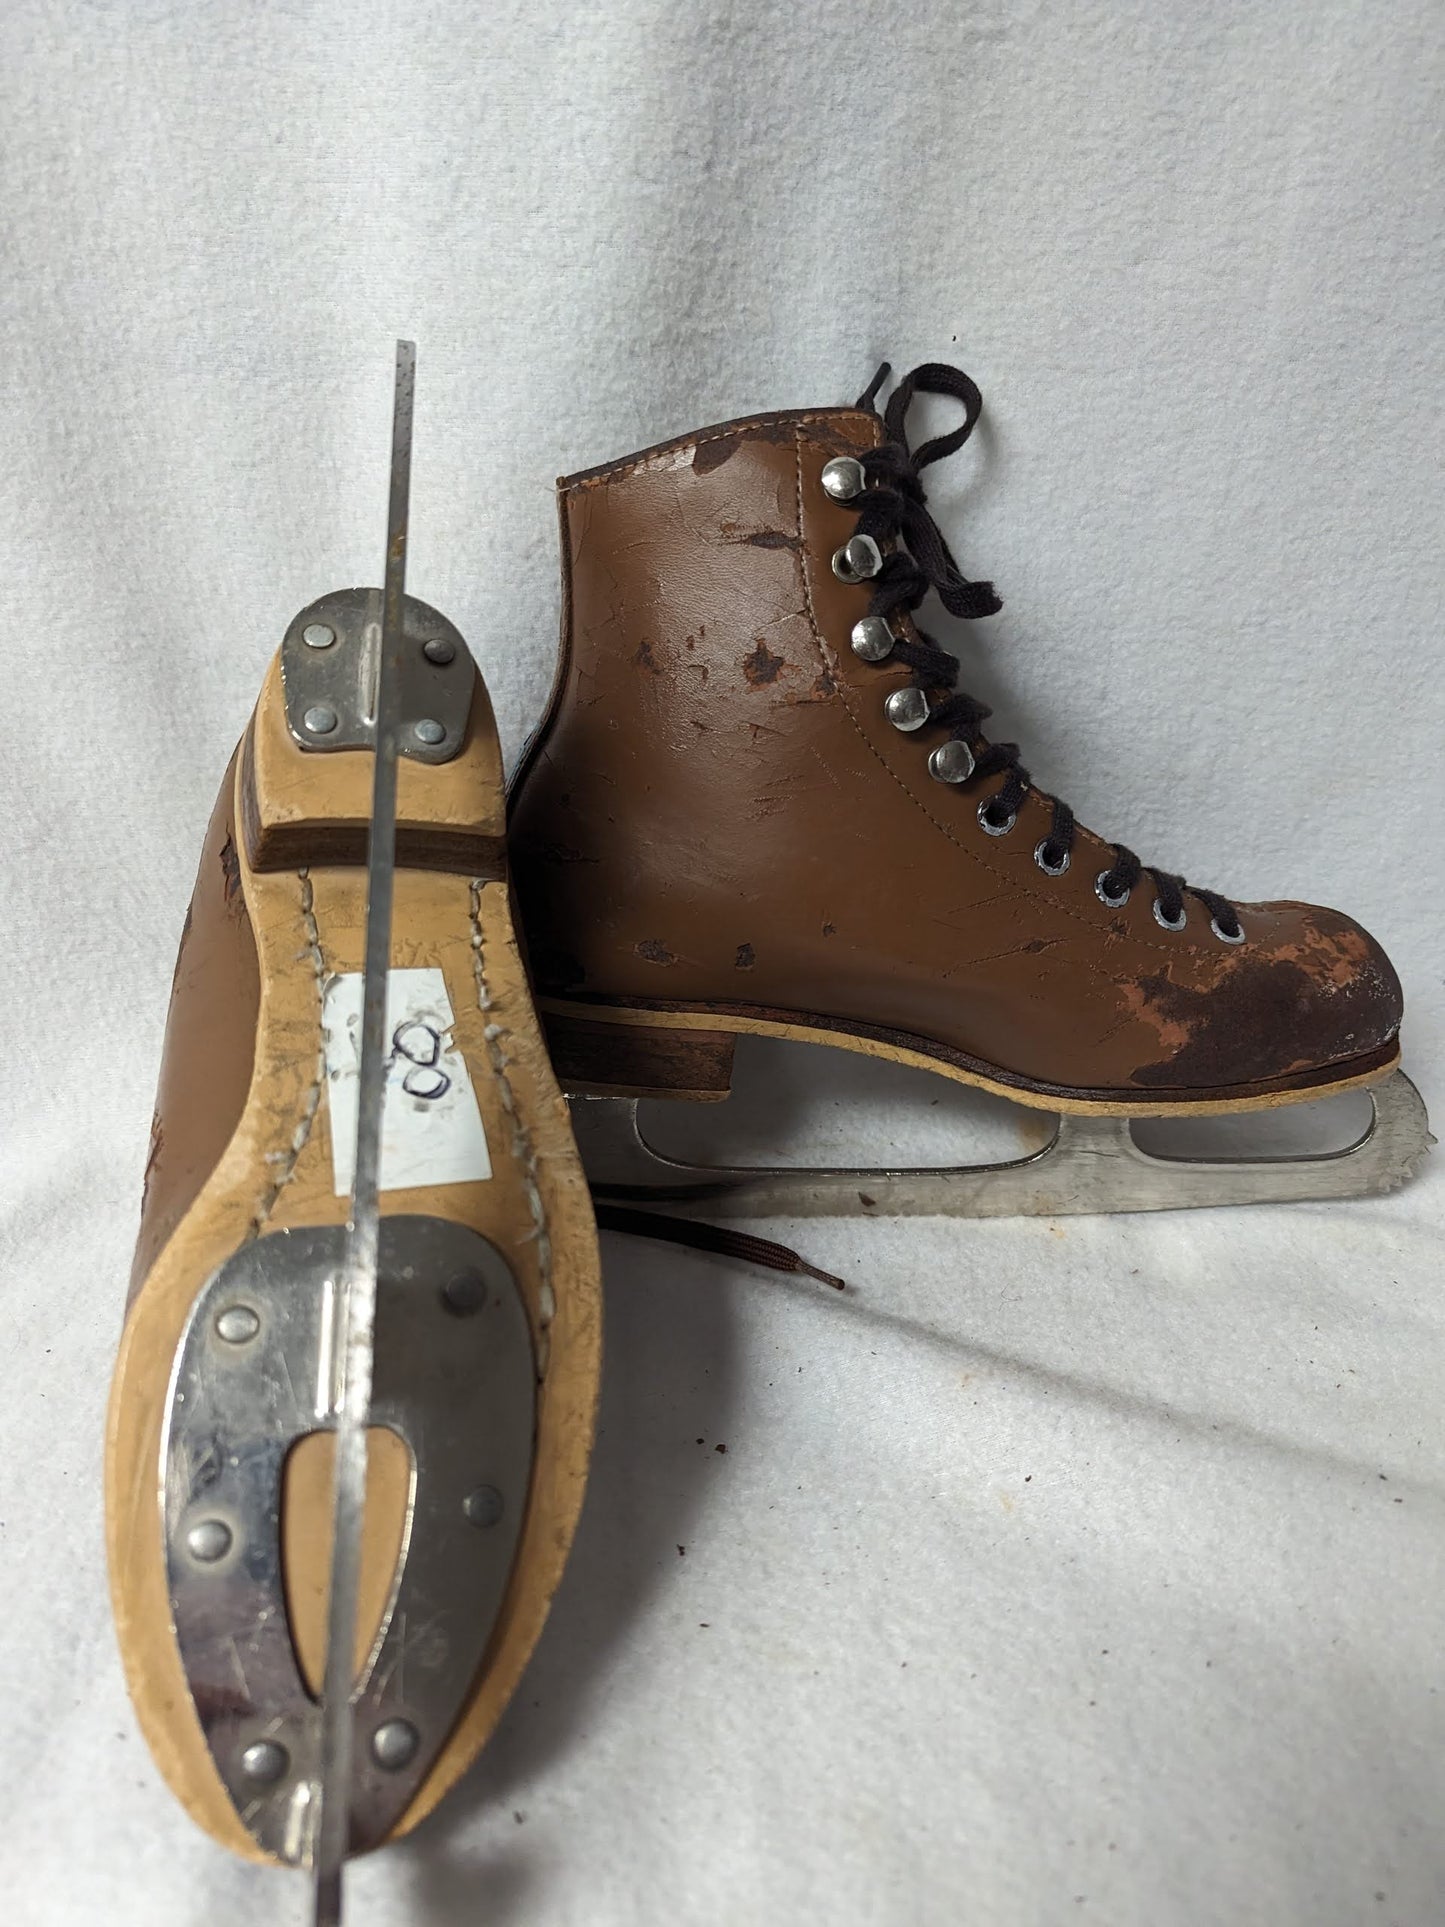 Rink Master Ice Skates Size 4 Color Brown Condition Used